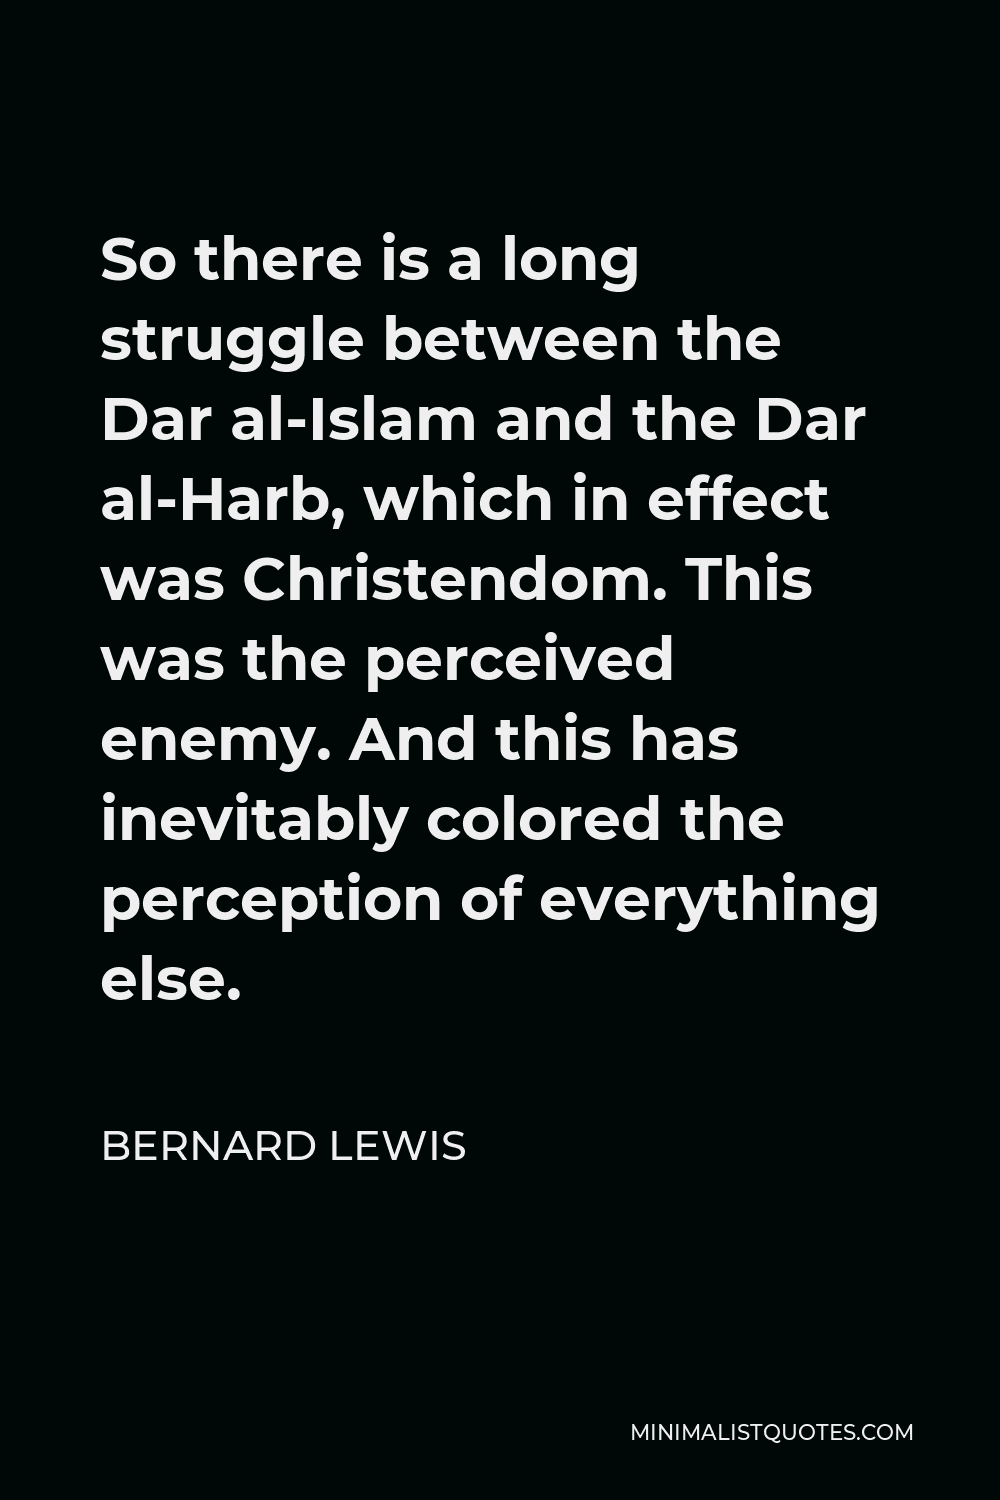 Bernard Lewis Quote - So there is a long struggle between the Dar al-Islam and the Dar al-Harb, which in effect was Christendom. This was the perceived enemy. And this has inevitably colored the perception of everything else.